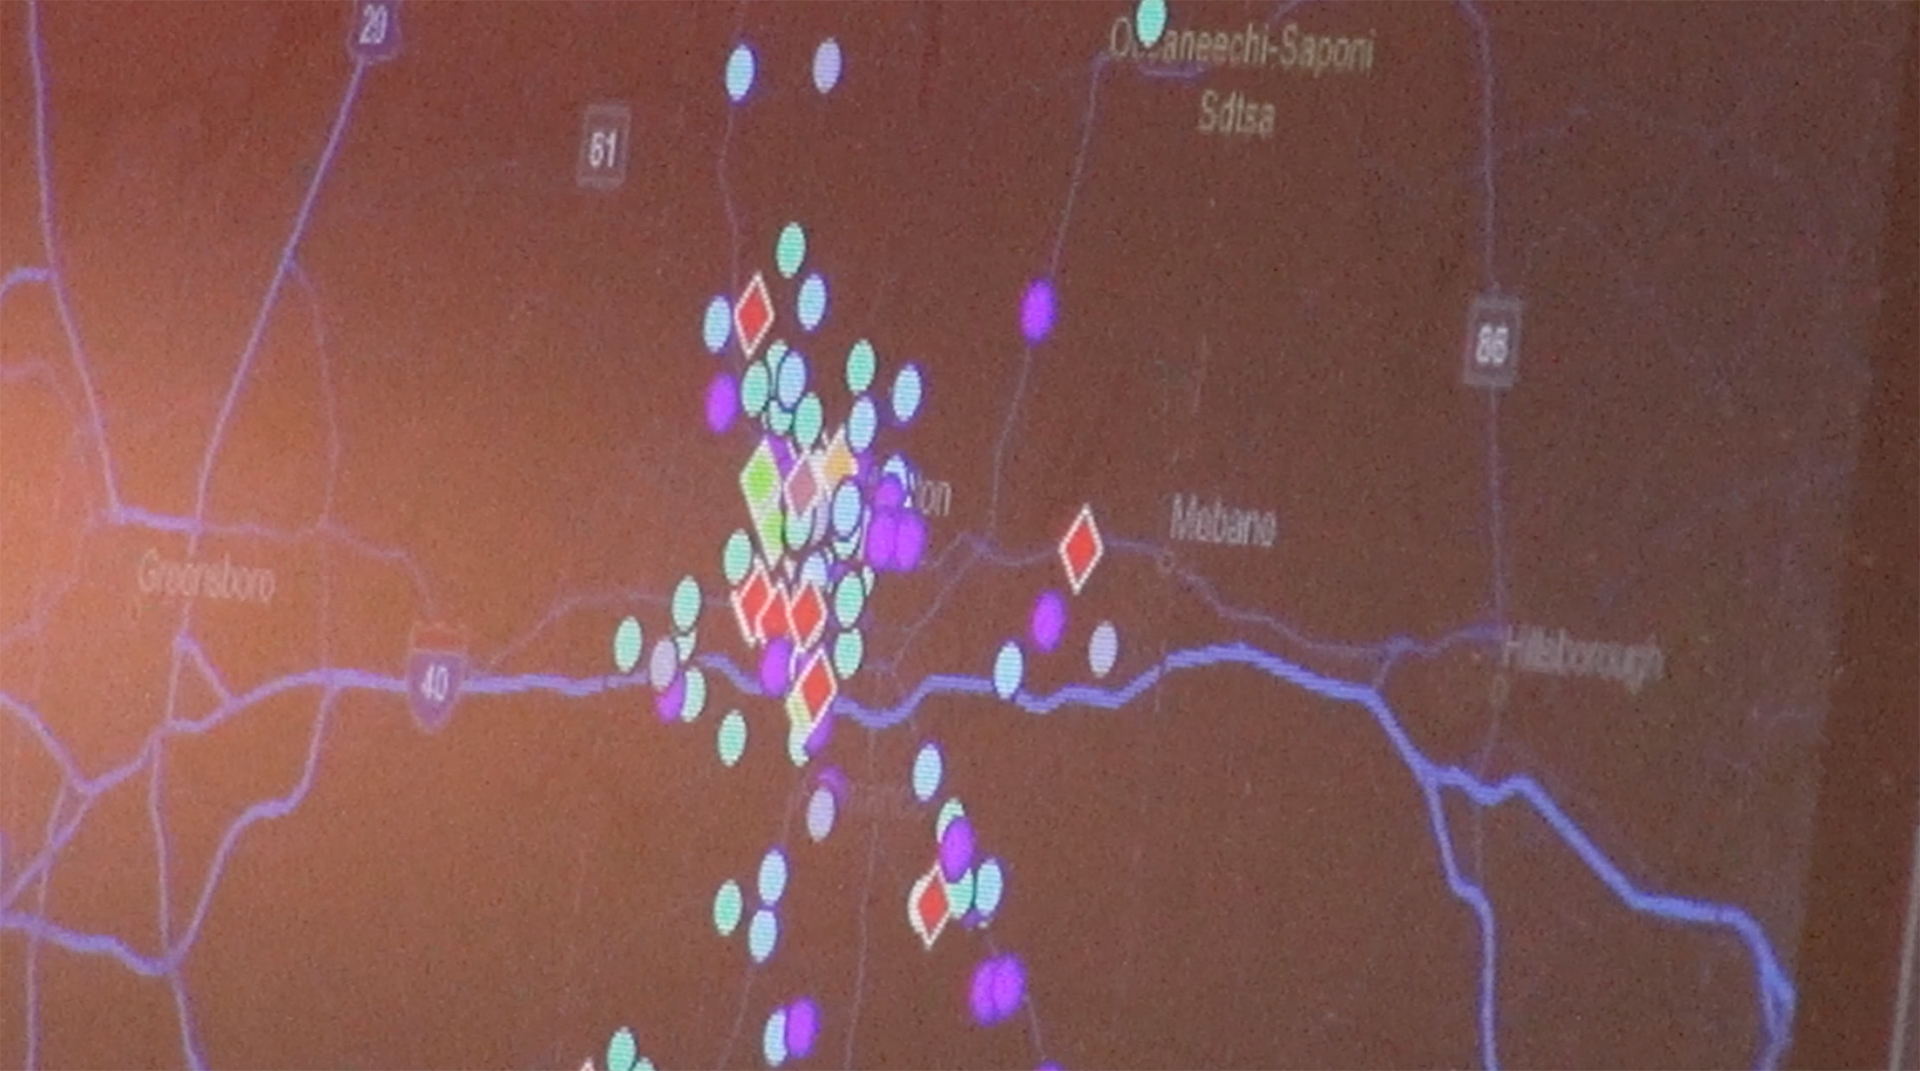 The Alamance County Sherriff's Office started using a system called 'ODMAP' earlier this year. It allows the agency to track overdoses and allocate resources to hotspots in their jurisdictions.